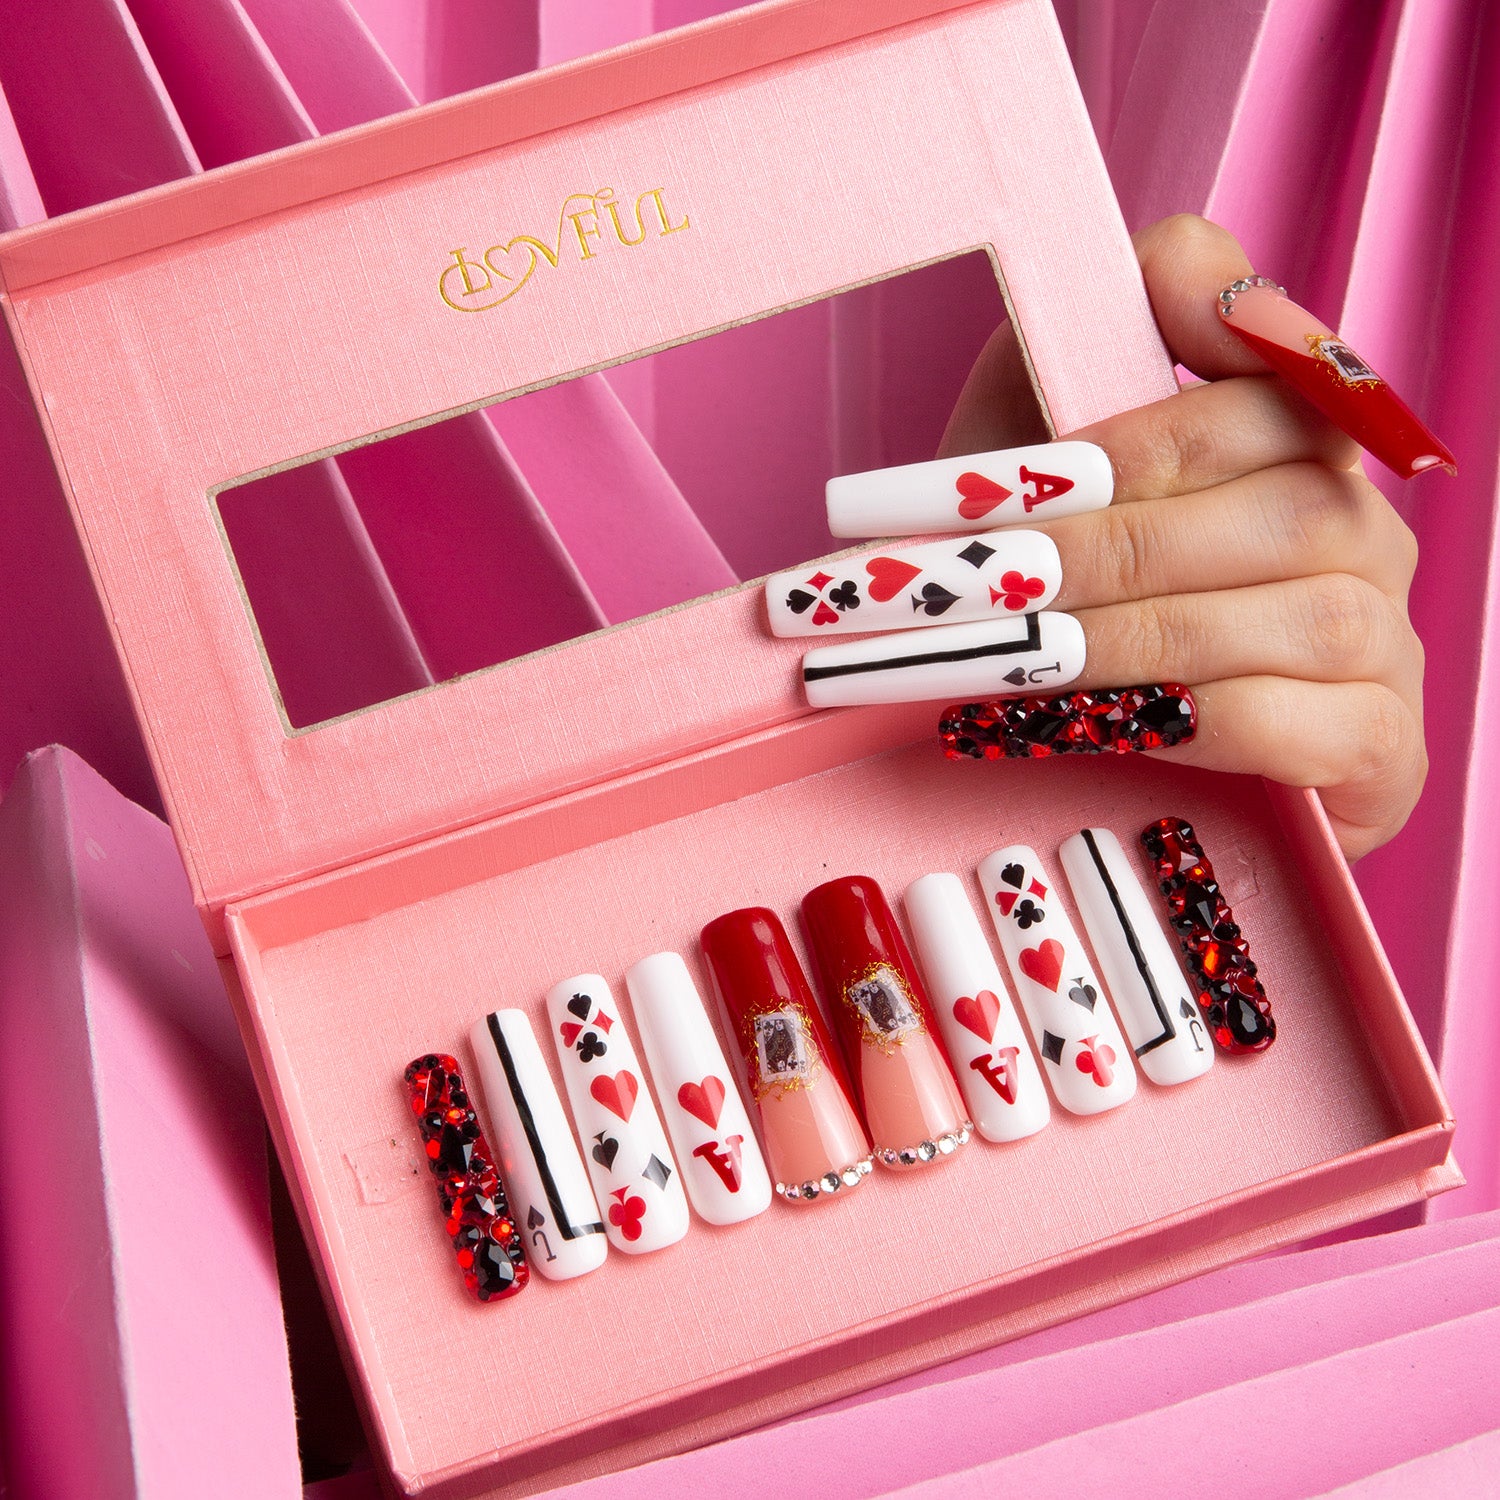 Poker Queen press-on nail set displayed in a pink box with various red and white card-themed designs, including hearts, spades, and a Queen of Hearts motif. Hand showcasing the nails.